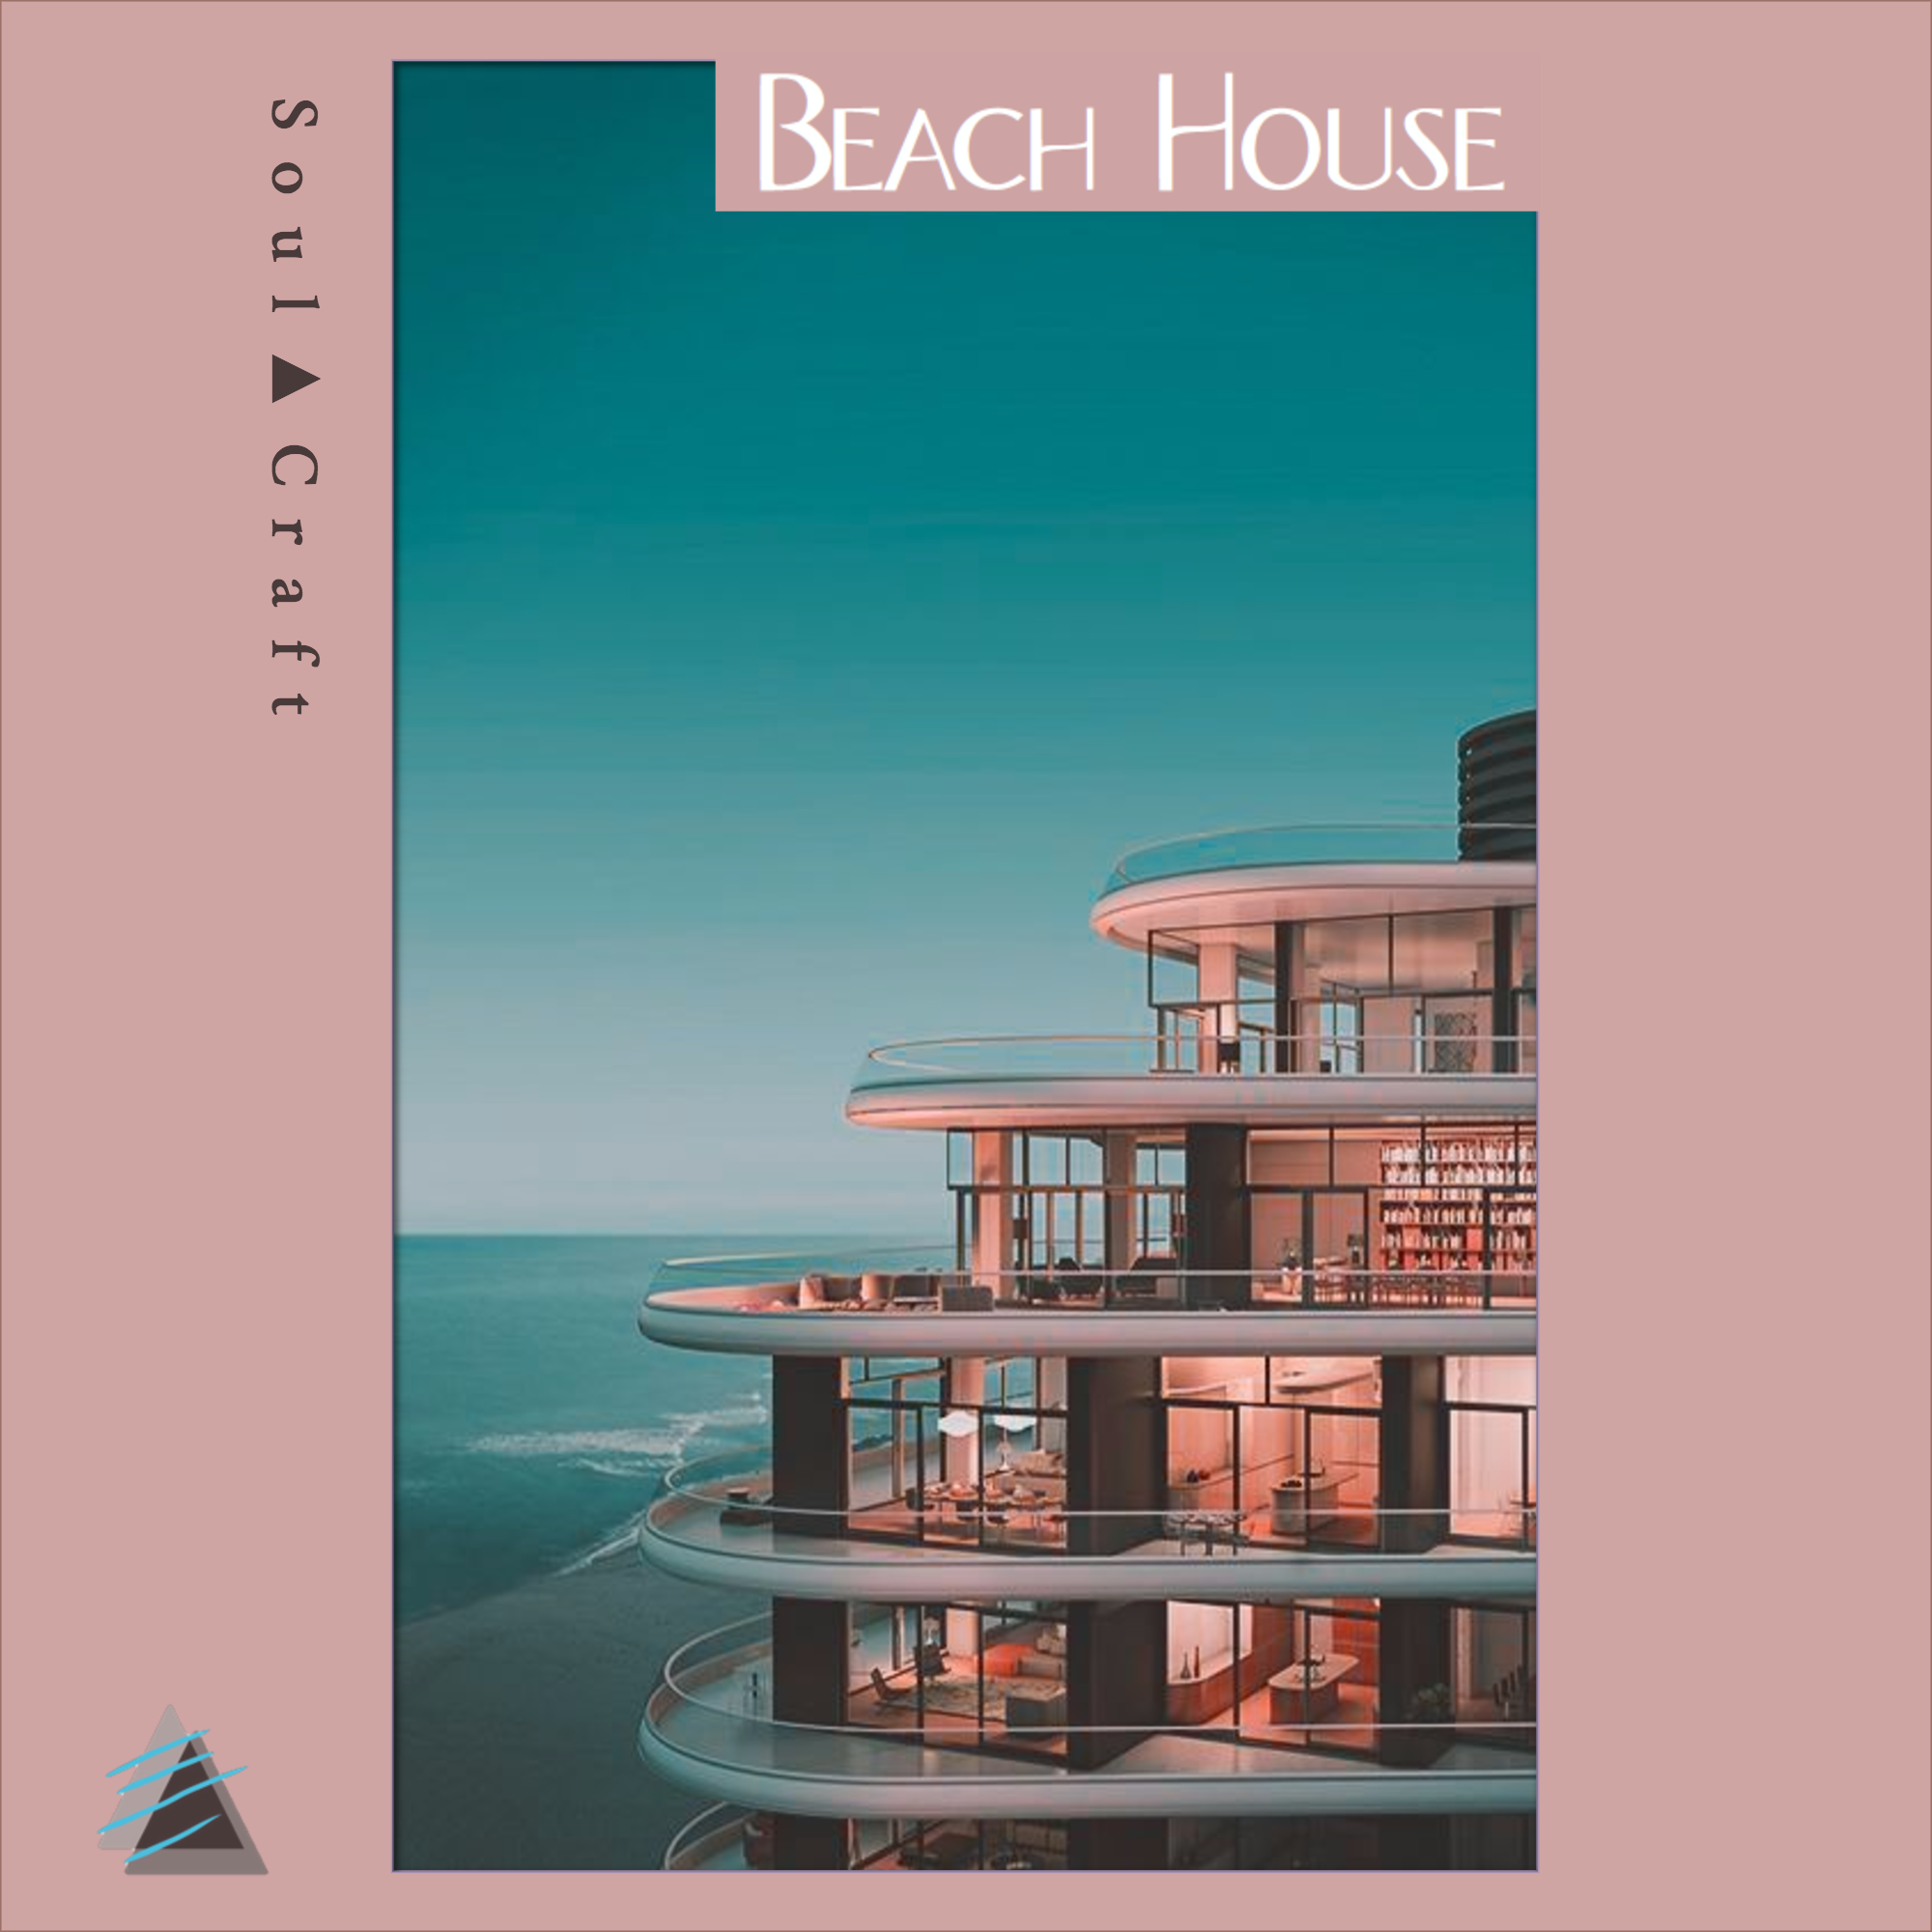 soulful beach house shamanstems free download